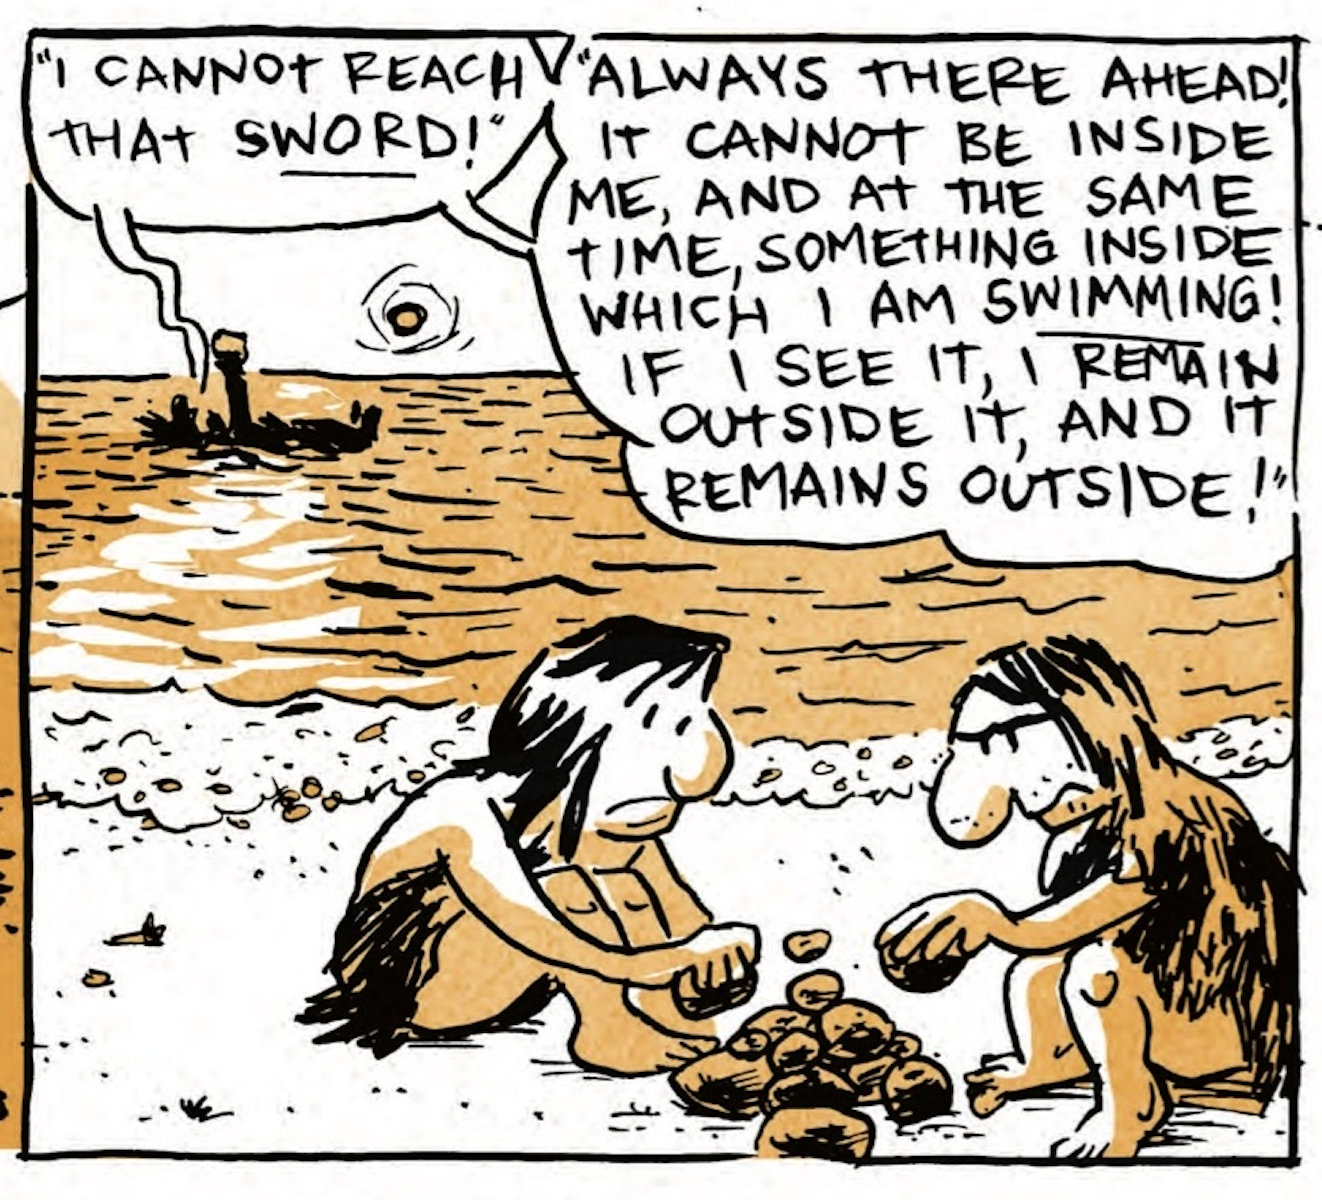 Two cave people are making a pile of stones on the shore, perhaps for a fire, as B shouts in the background, â€œI cannot reach that SWORD! Always there ahead! It cannot be inside me, and at the same time, something inside which I am SWIMMING! If I see it, I remain outside it, and it remains outside!â€